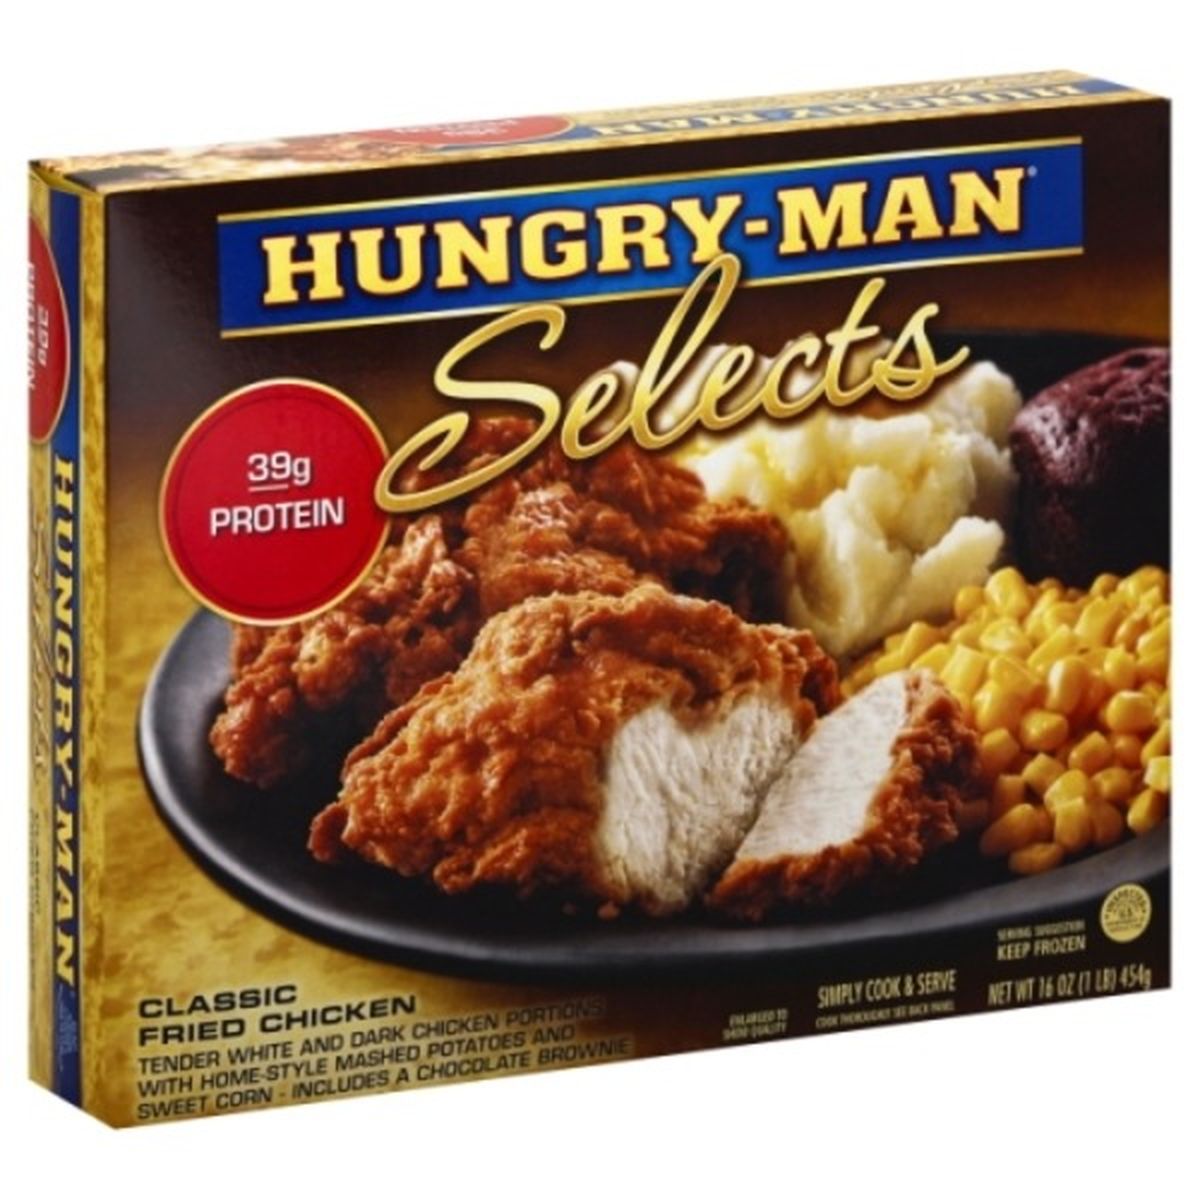 Calories in Hungry-Man Selects Classic Fried Chicken